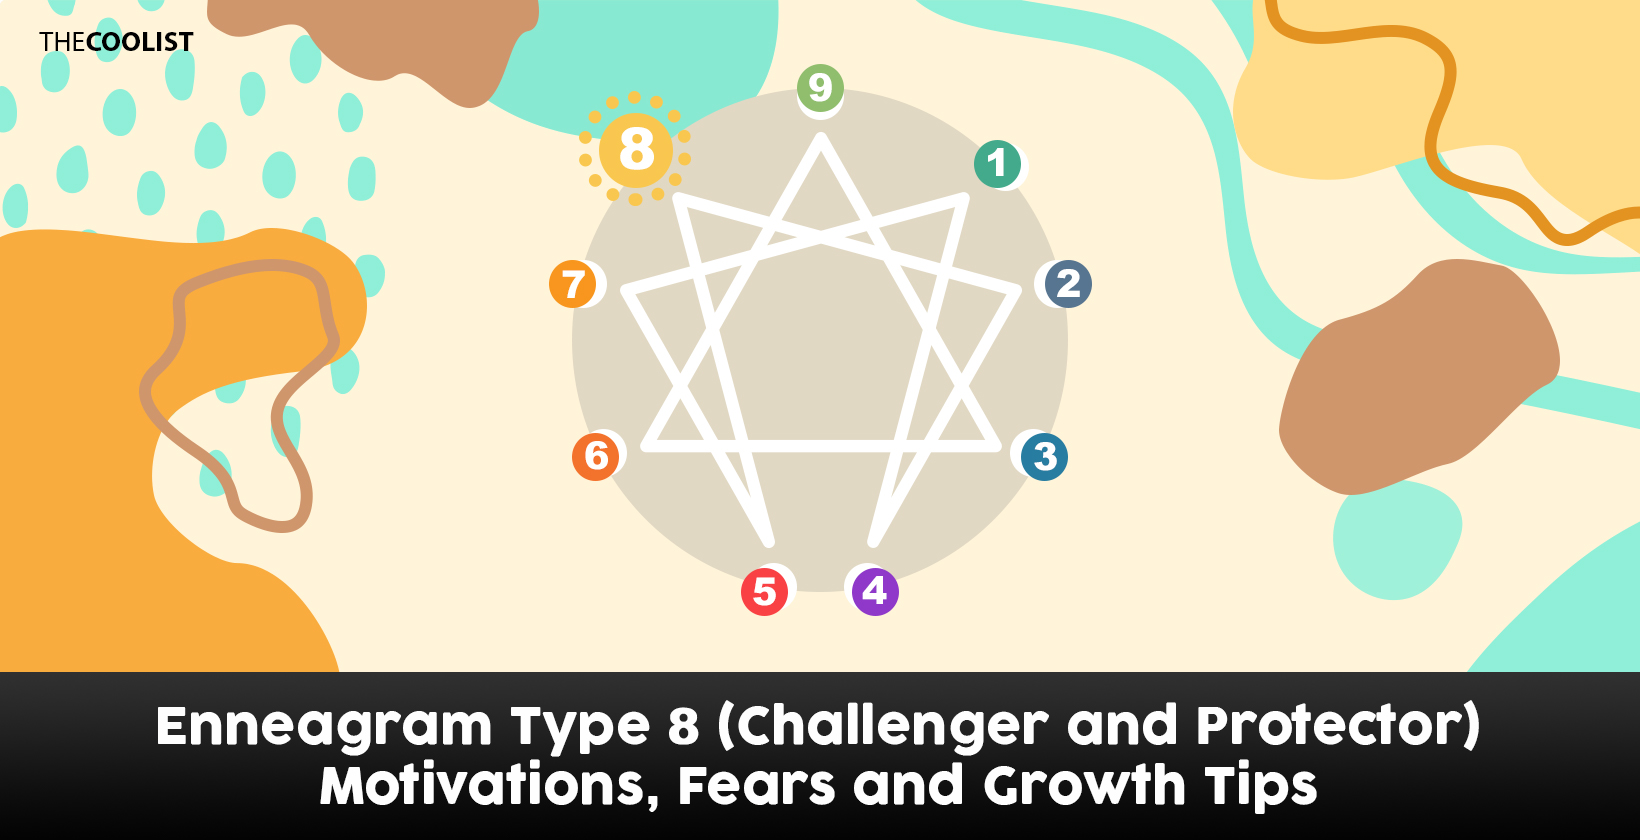 Enneagram Type 8: The Challenger and The Protector